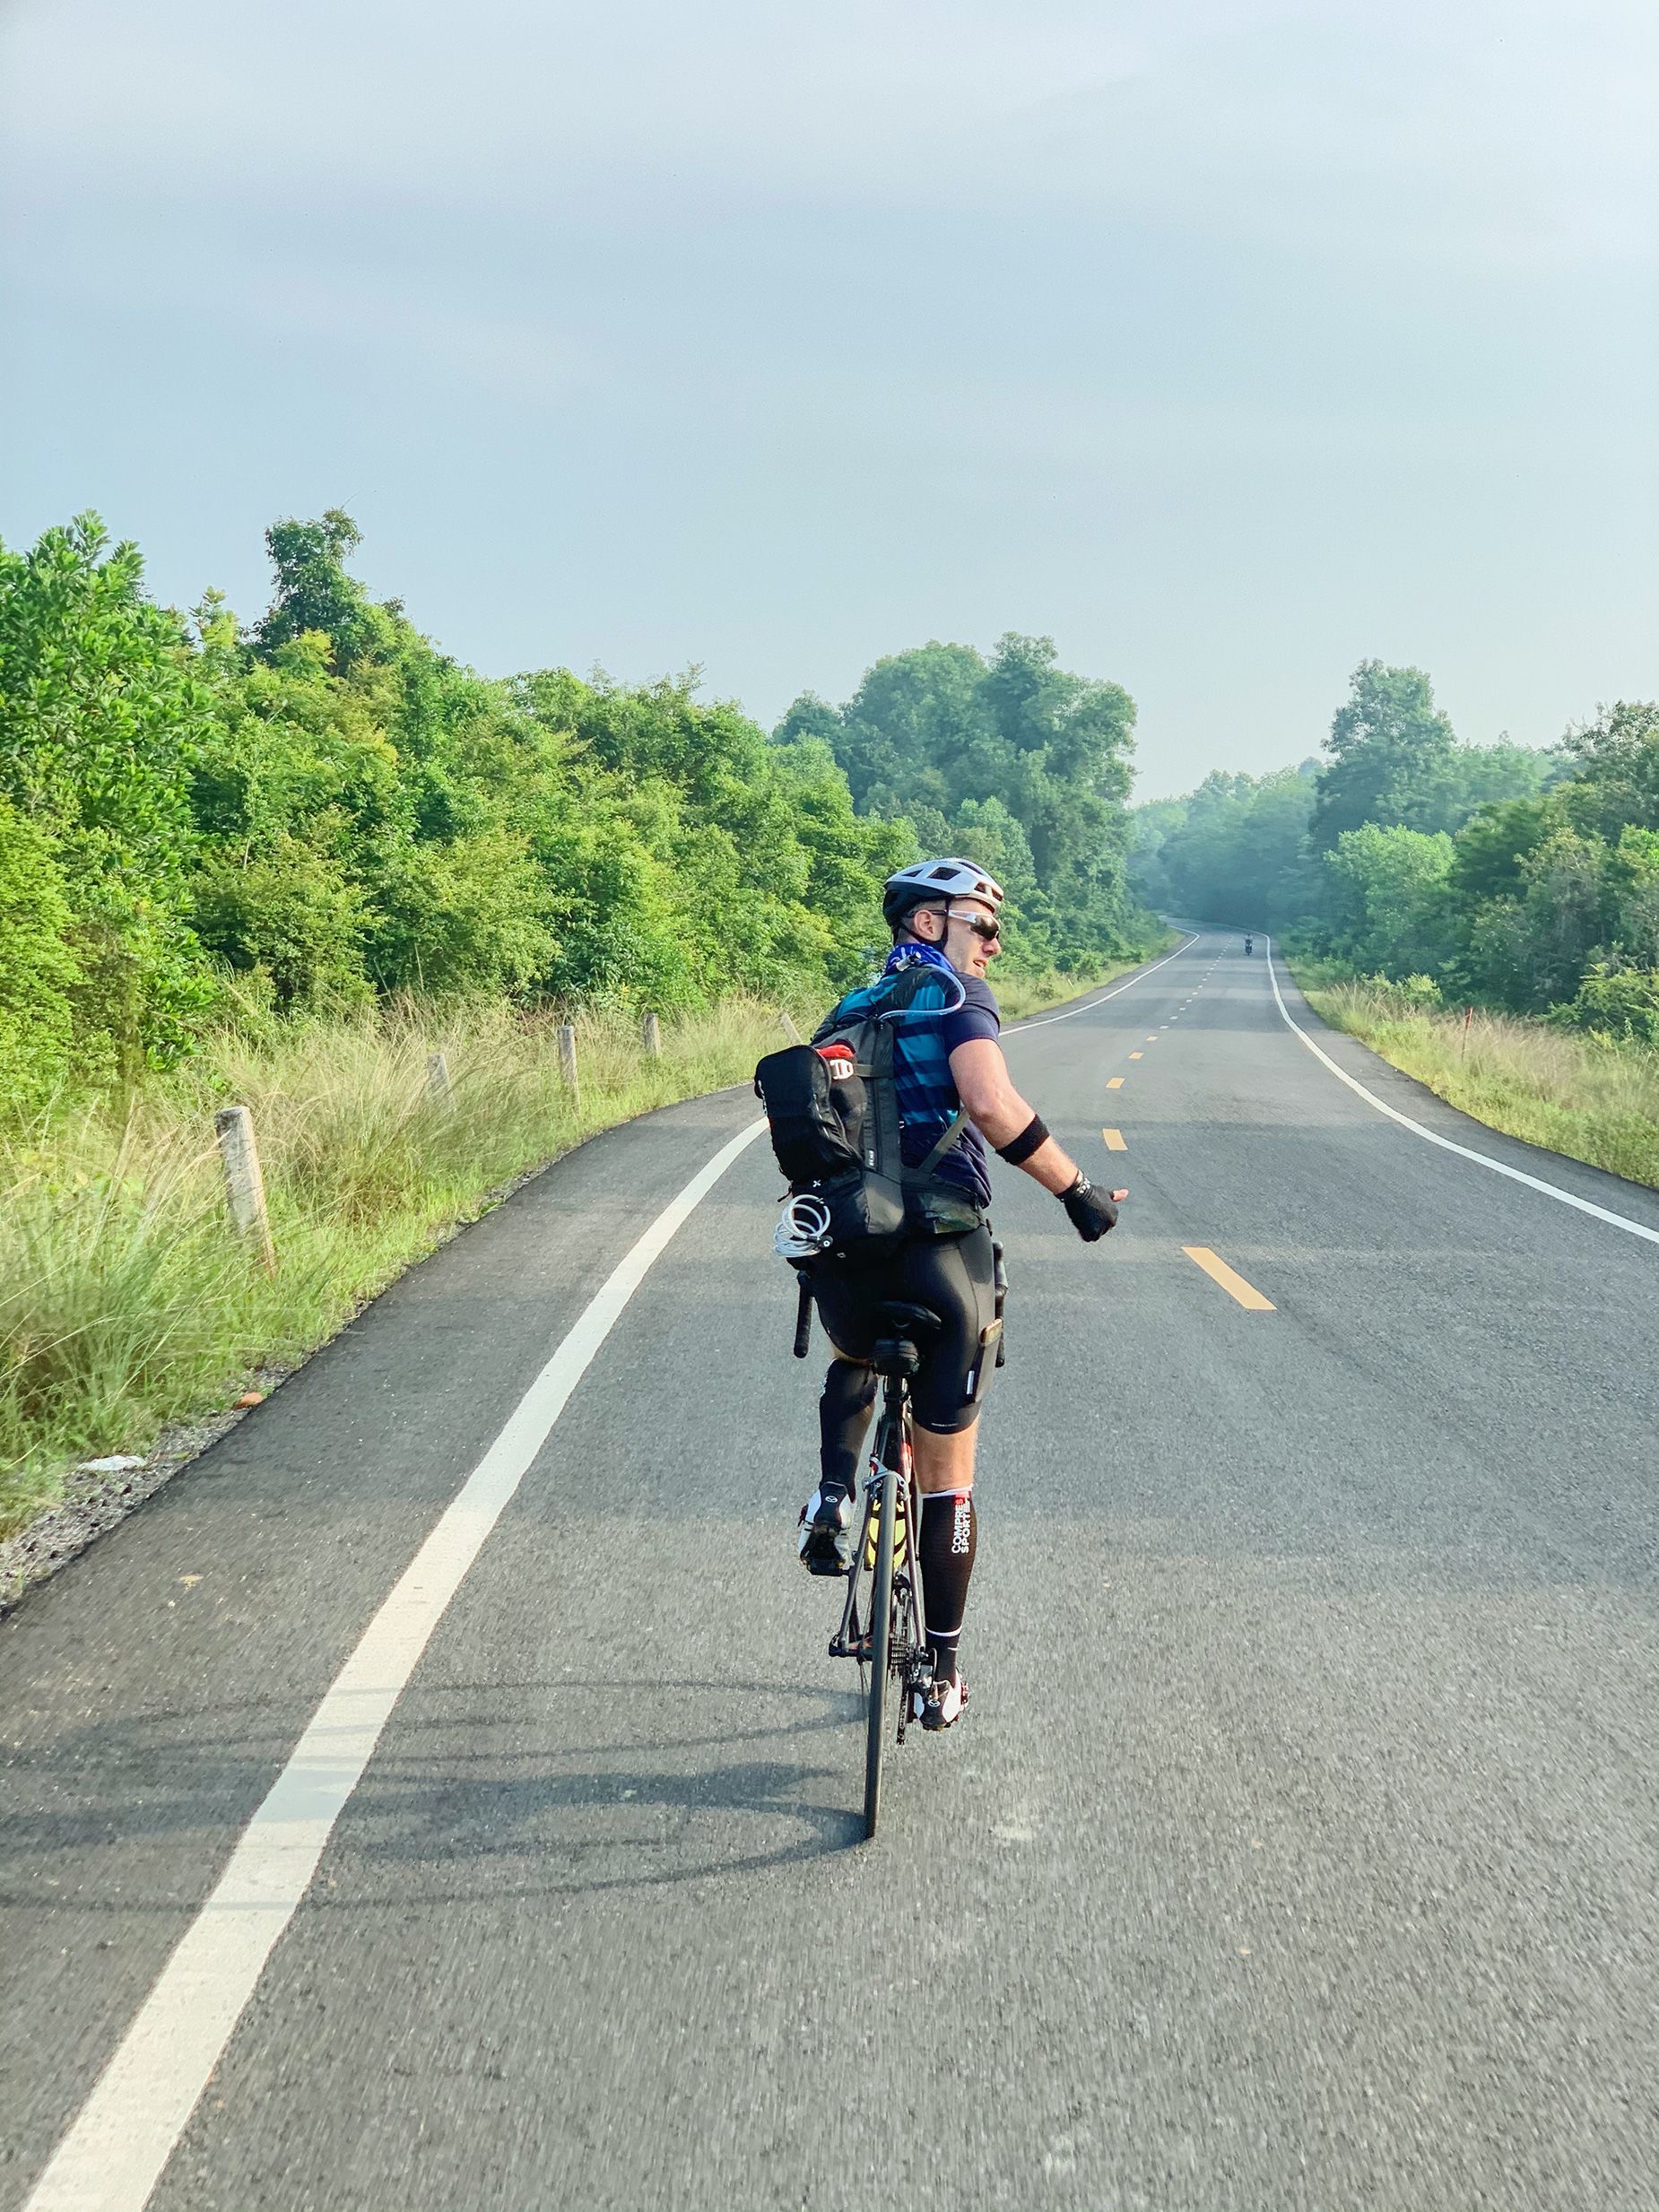 Ward cycling in south east Asia while completing the epic challenge of visiting every country in the world.